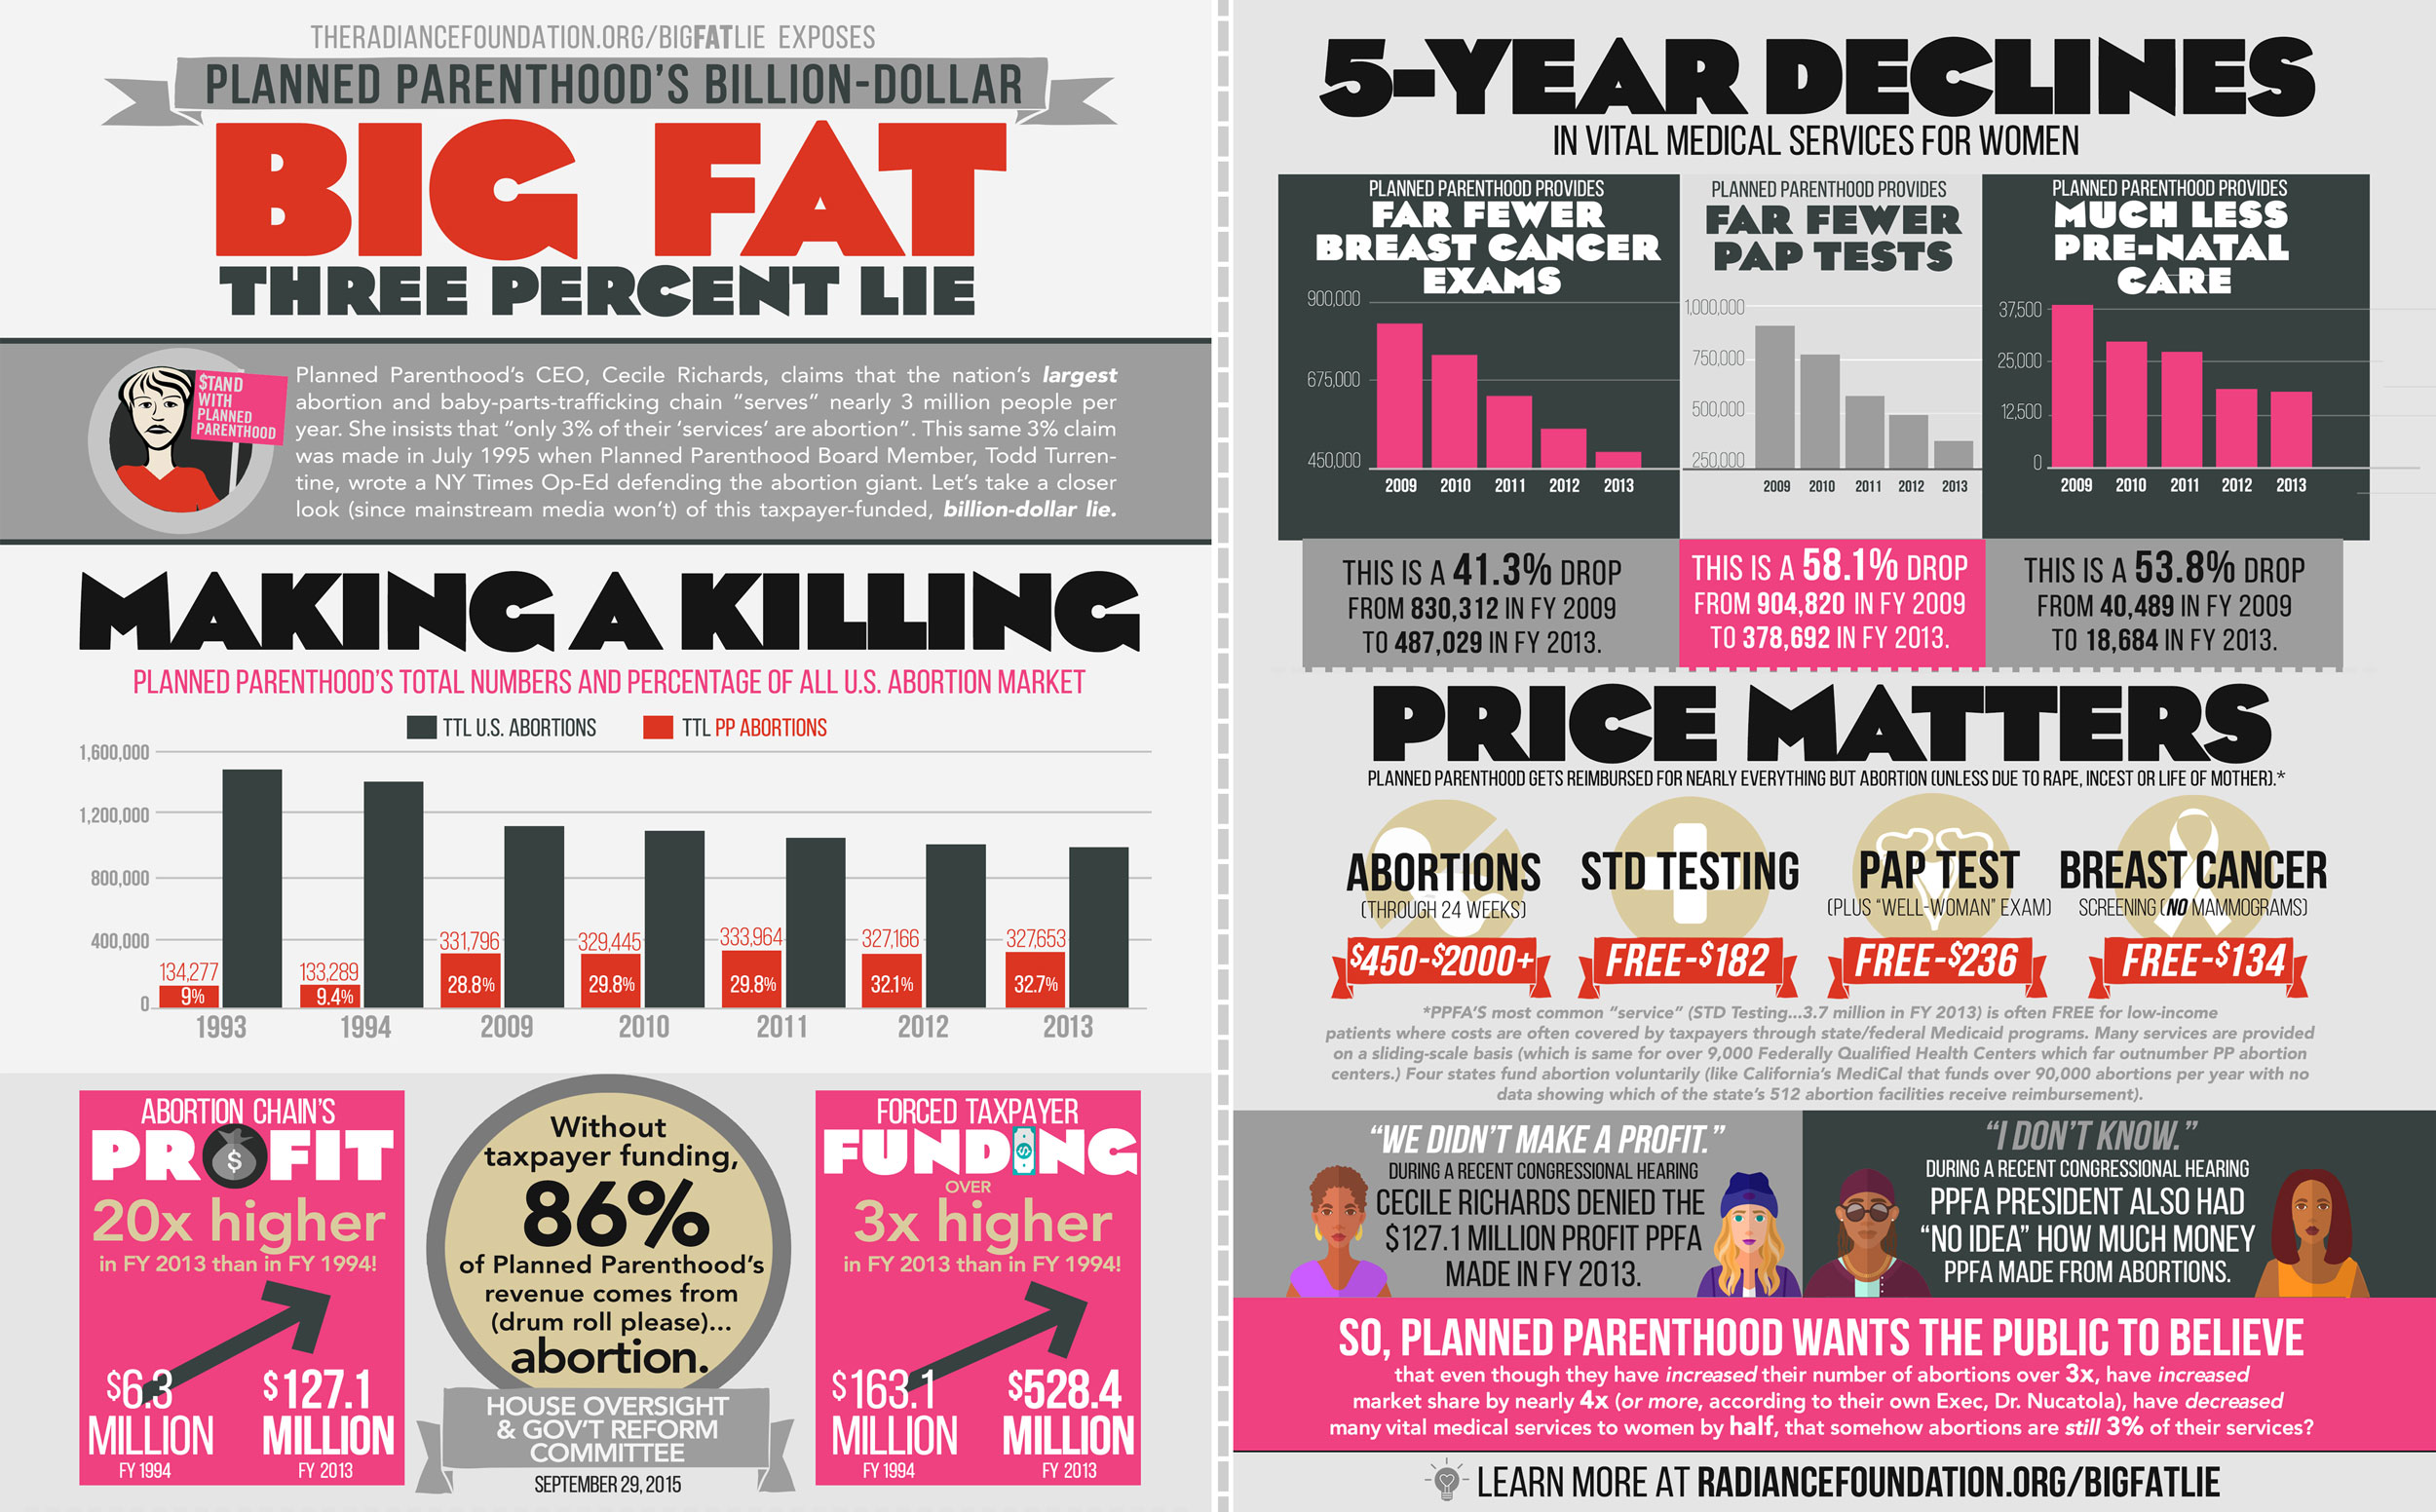 "Big Fat Three Percent Lie" exposed by The Radiance Foundation